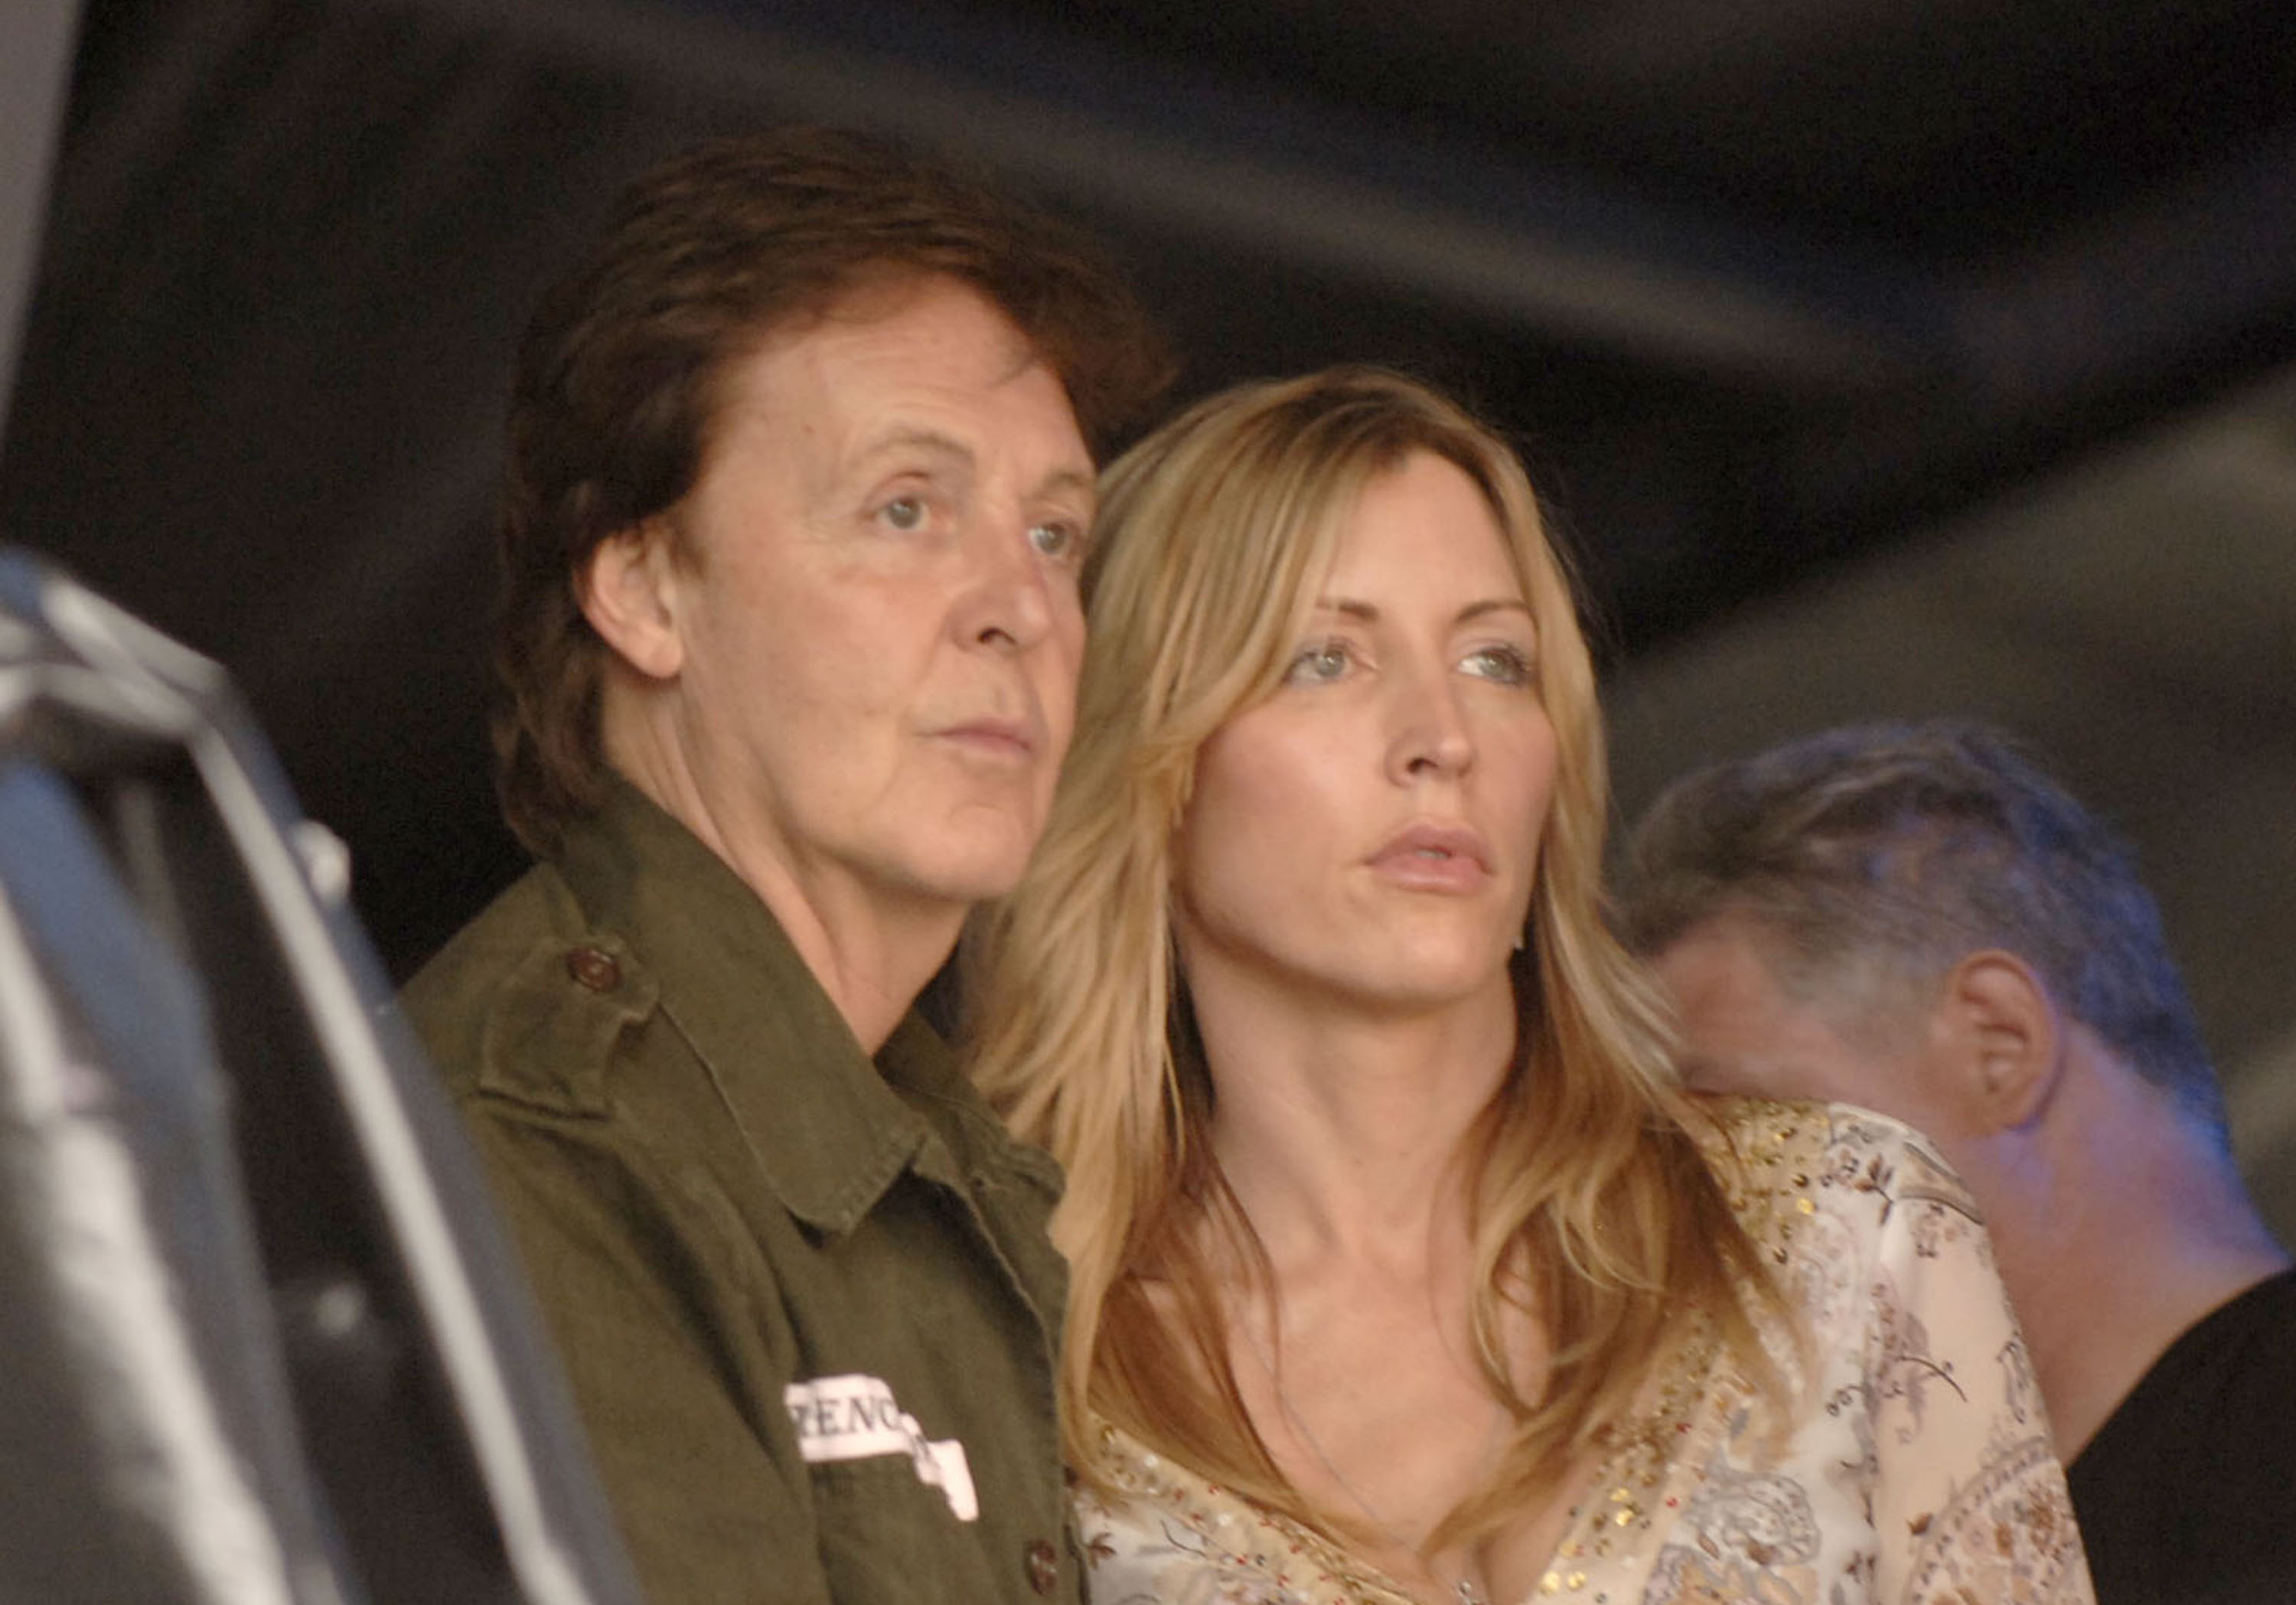 Paul McCartney and Heather Mills at the 3rd Annual Adopt-A-Minefield benefit gala on July 02, 2005 | Source: Getty Images